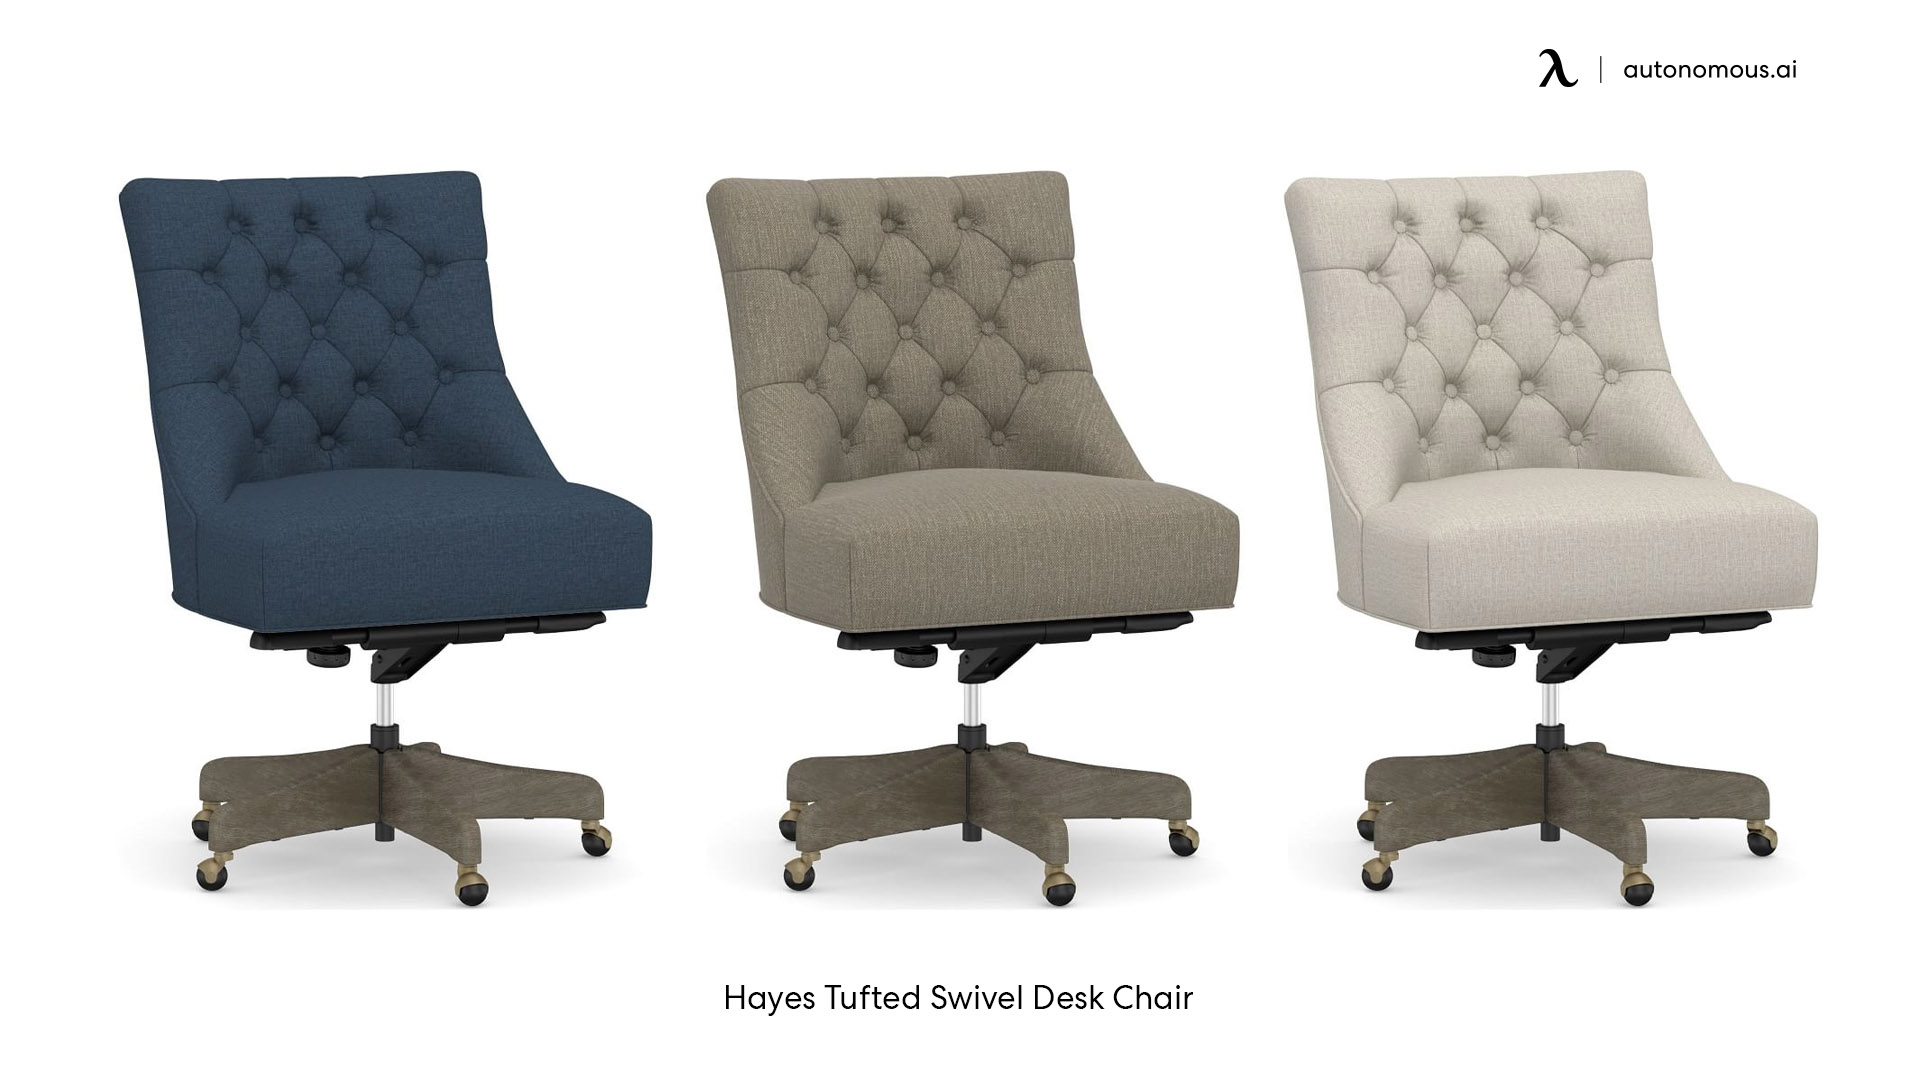 Hayes Tufted French Country office chair